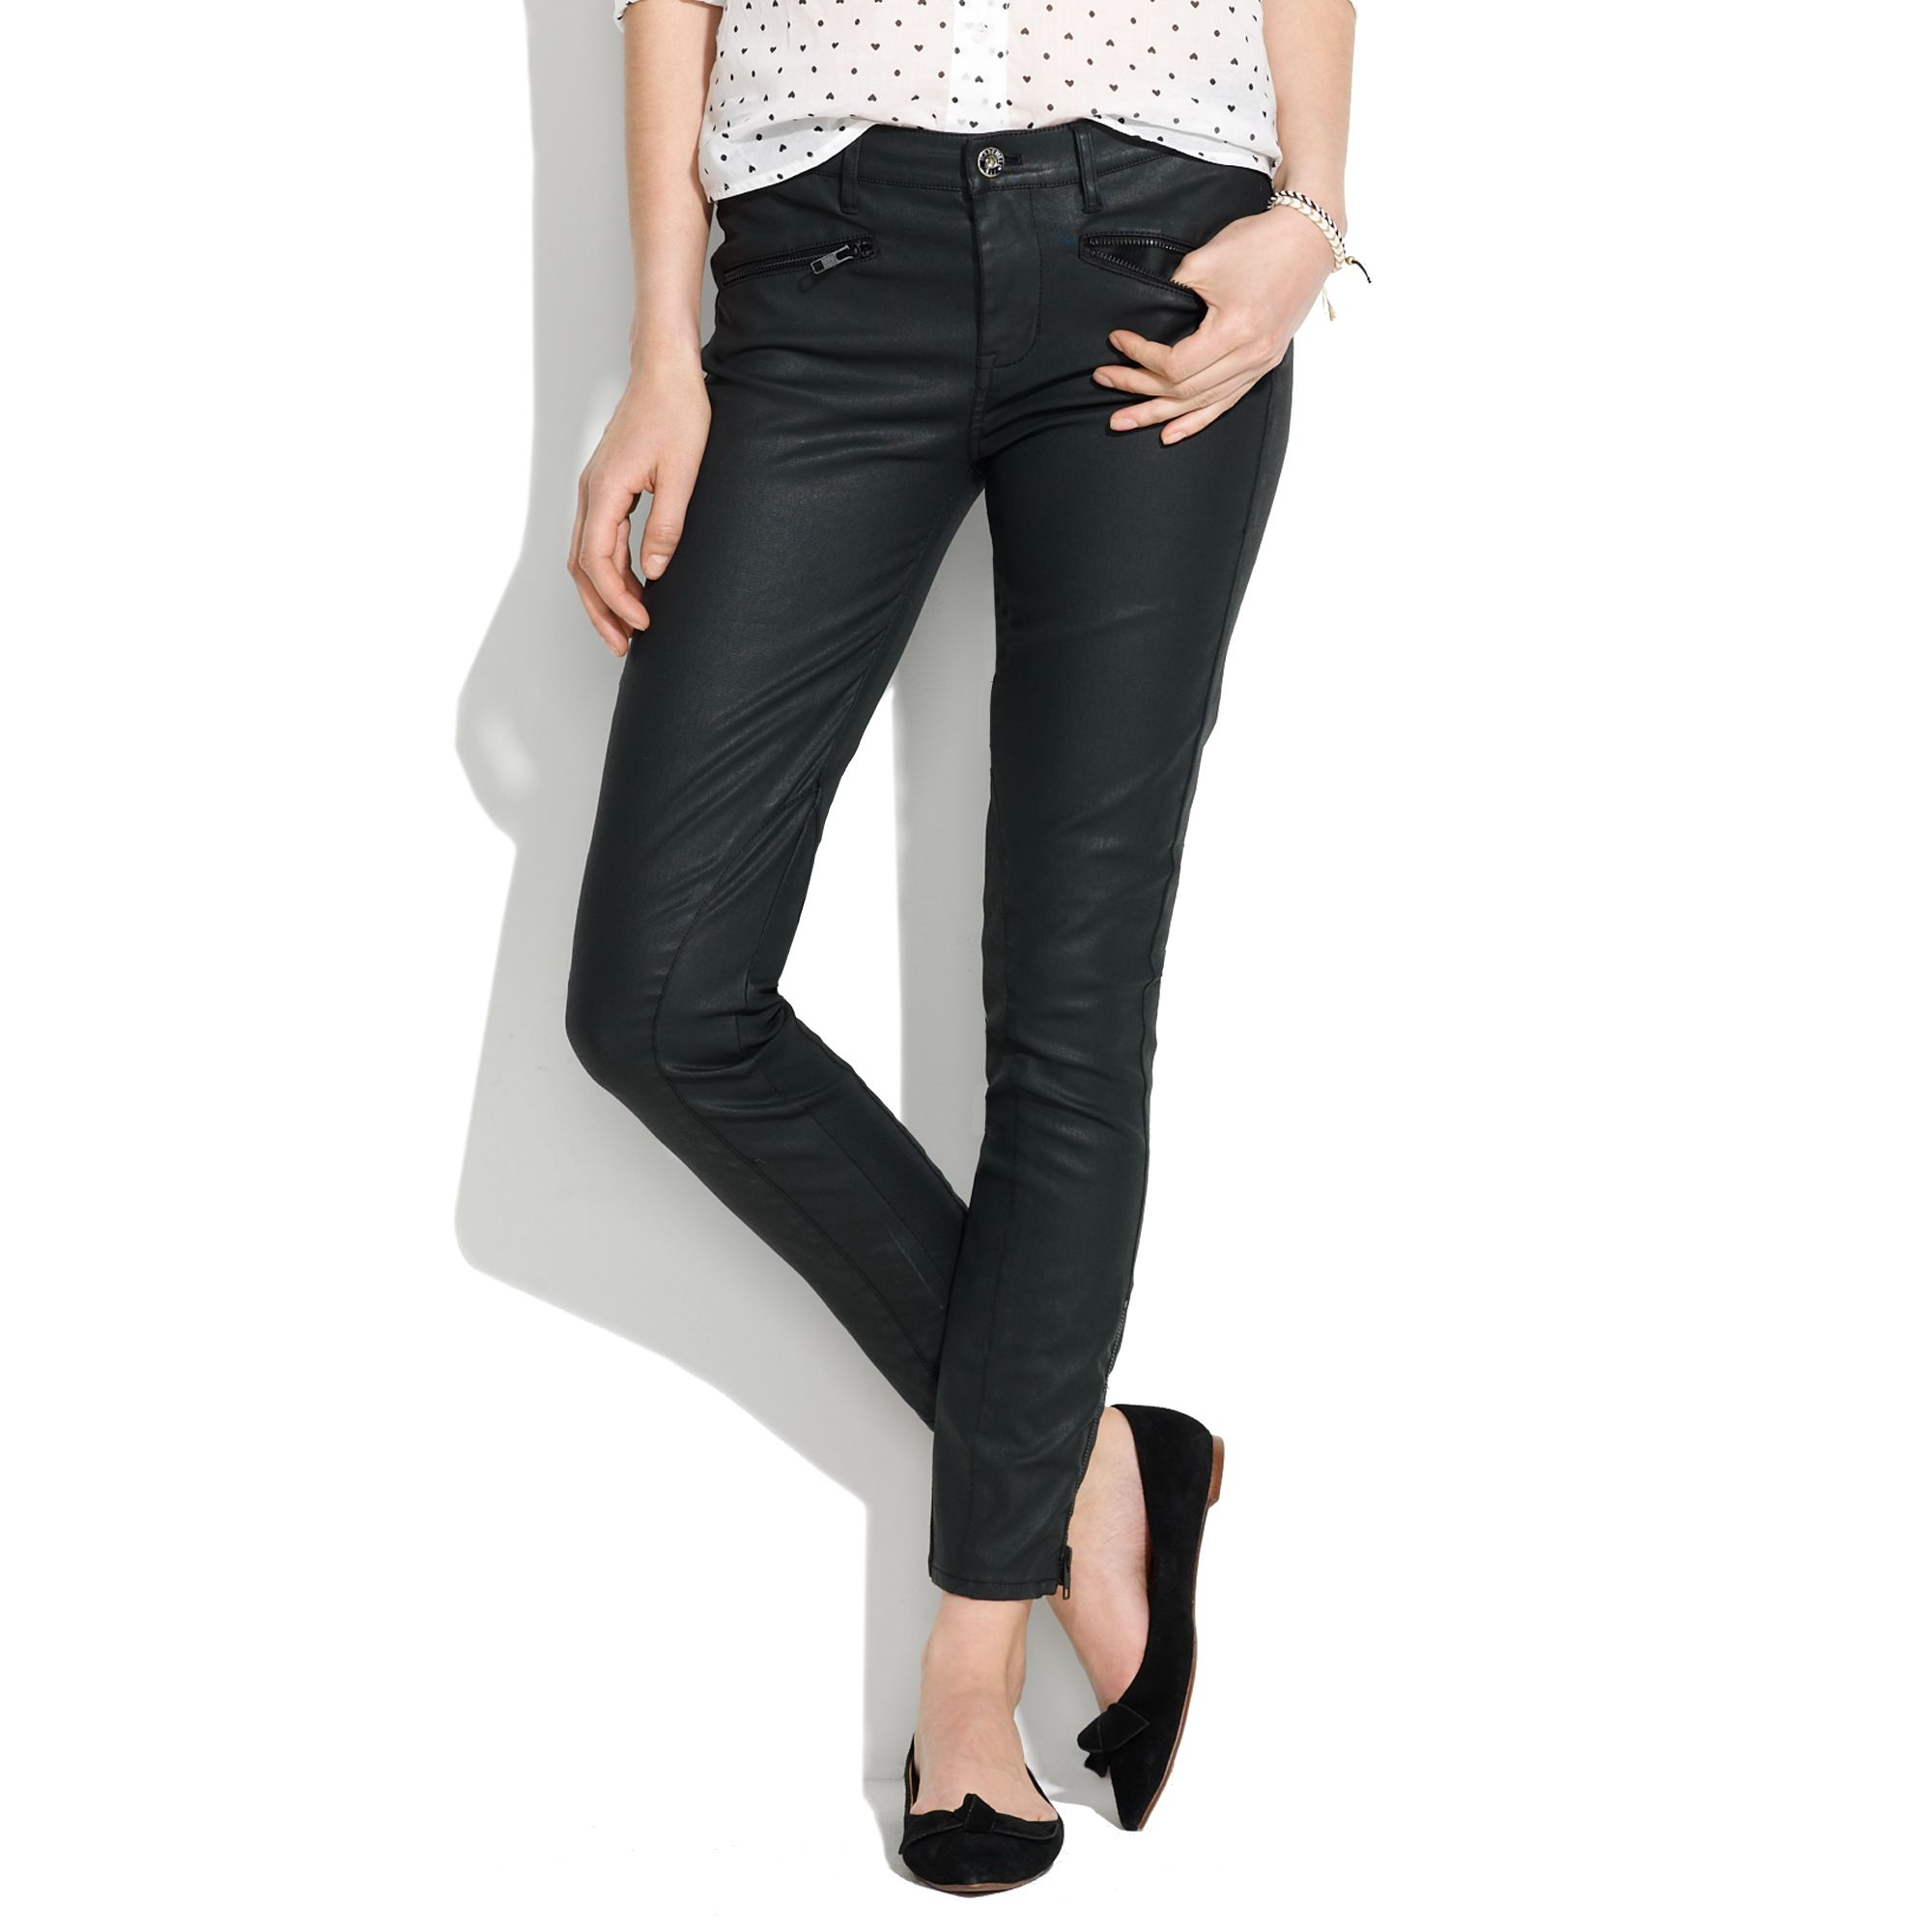 Madewell Skinny Skinny Ankle Coated Motorcycle Jeans in Black - Lyst